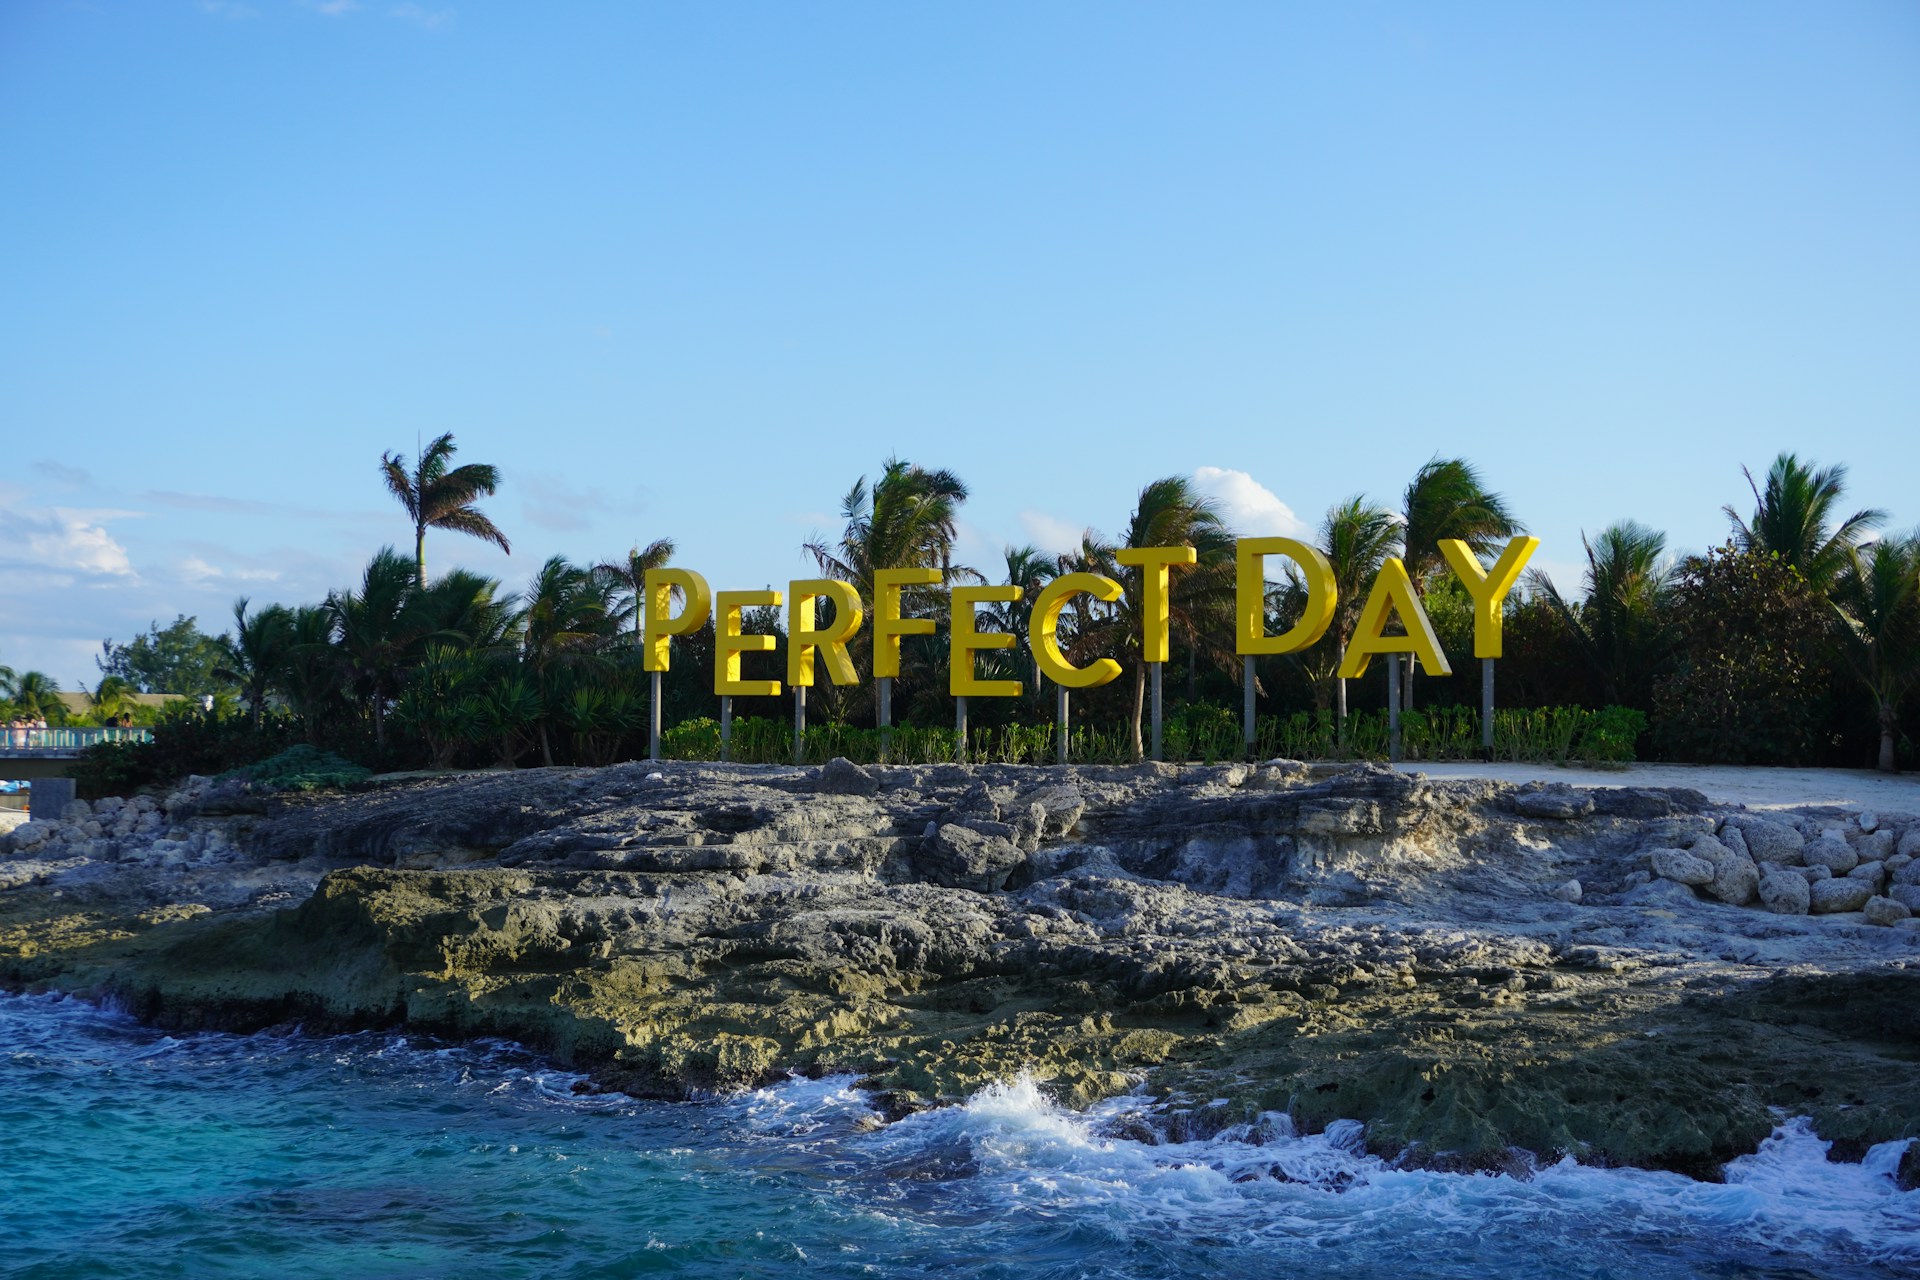 The Perfect day sign at Cococay